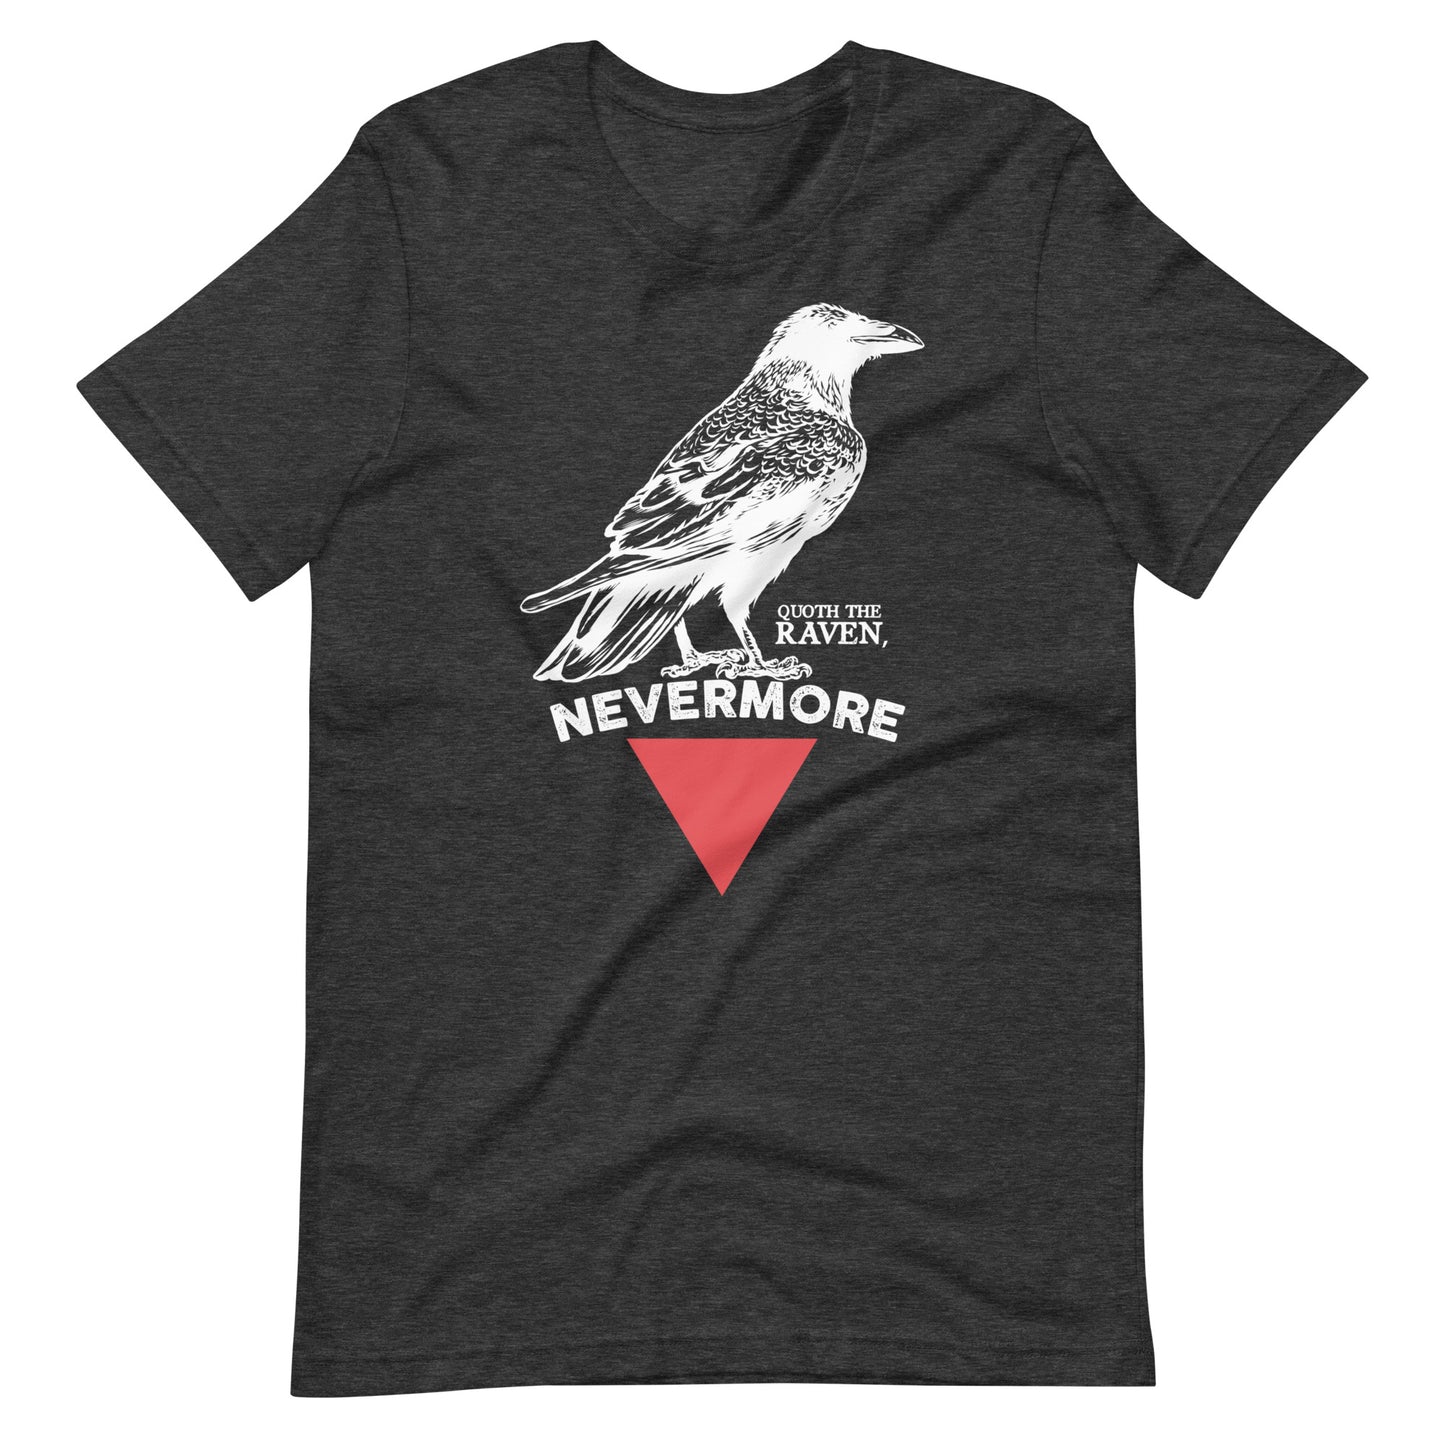 The Raven Nevermore Triangle - Men's t-shirt - Dark Grey Heather Front